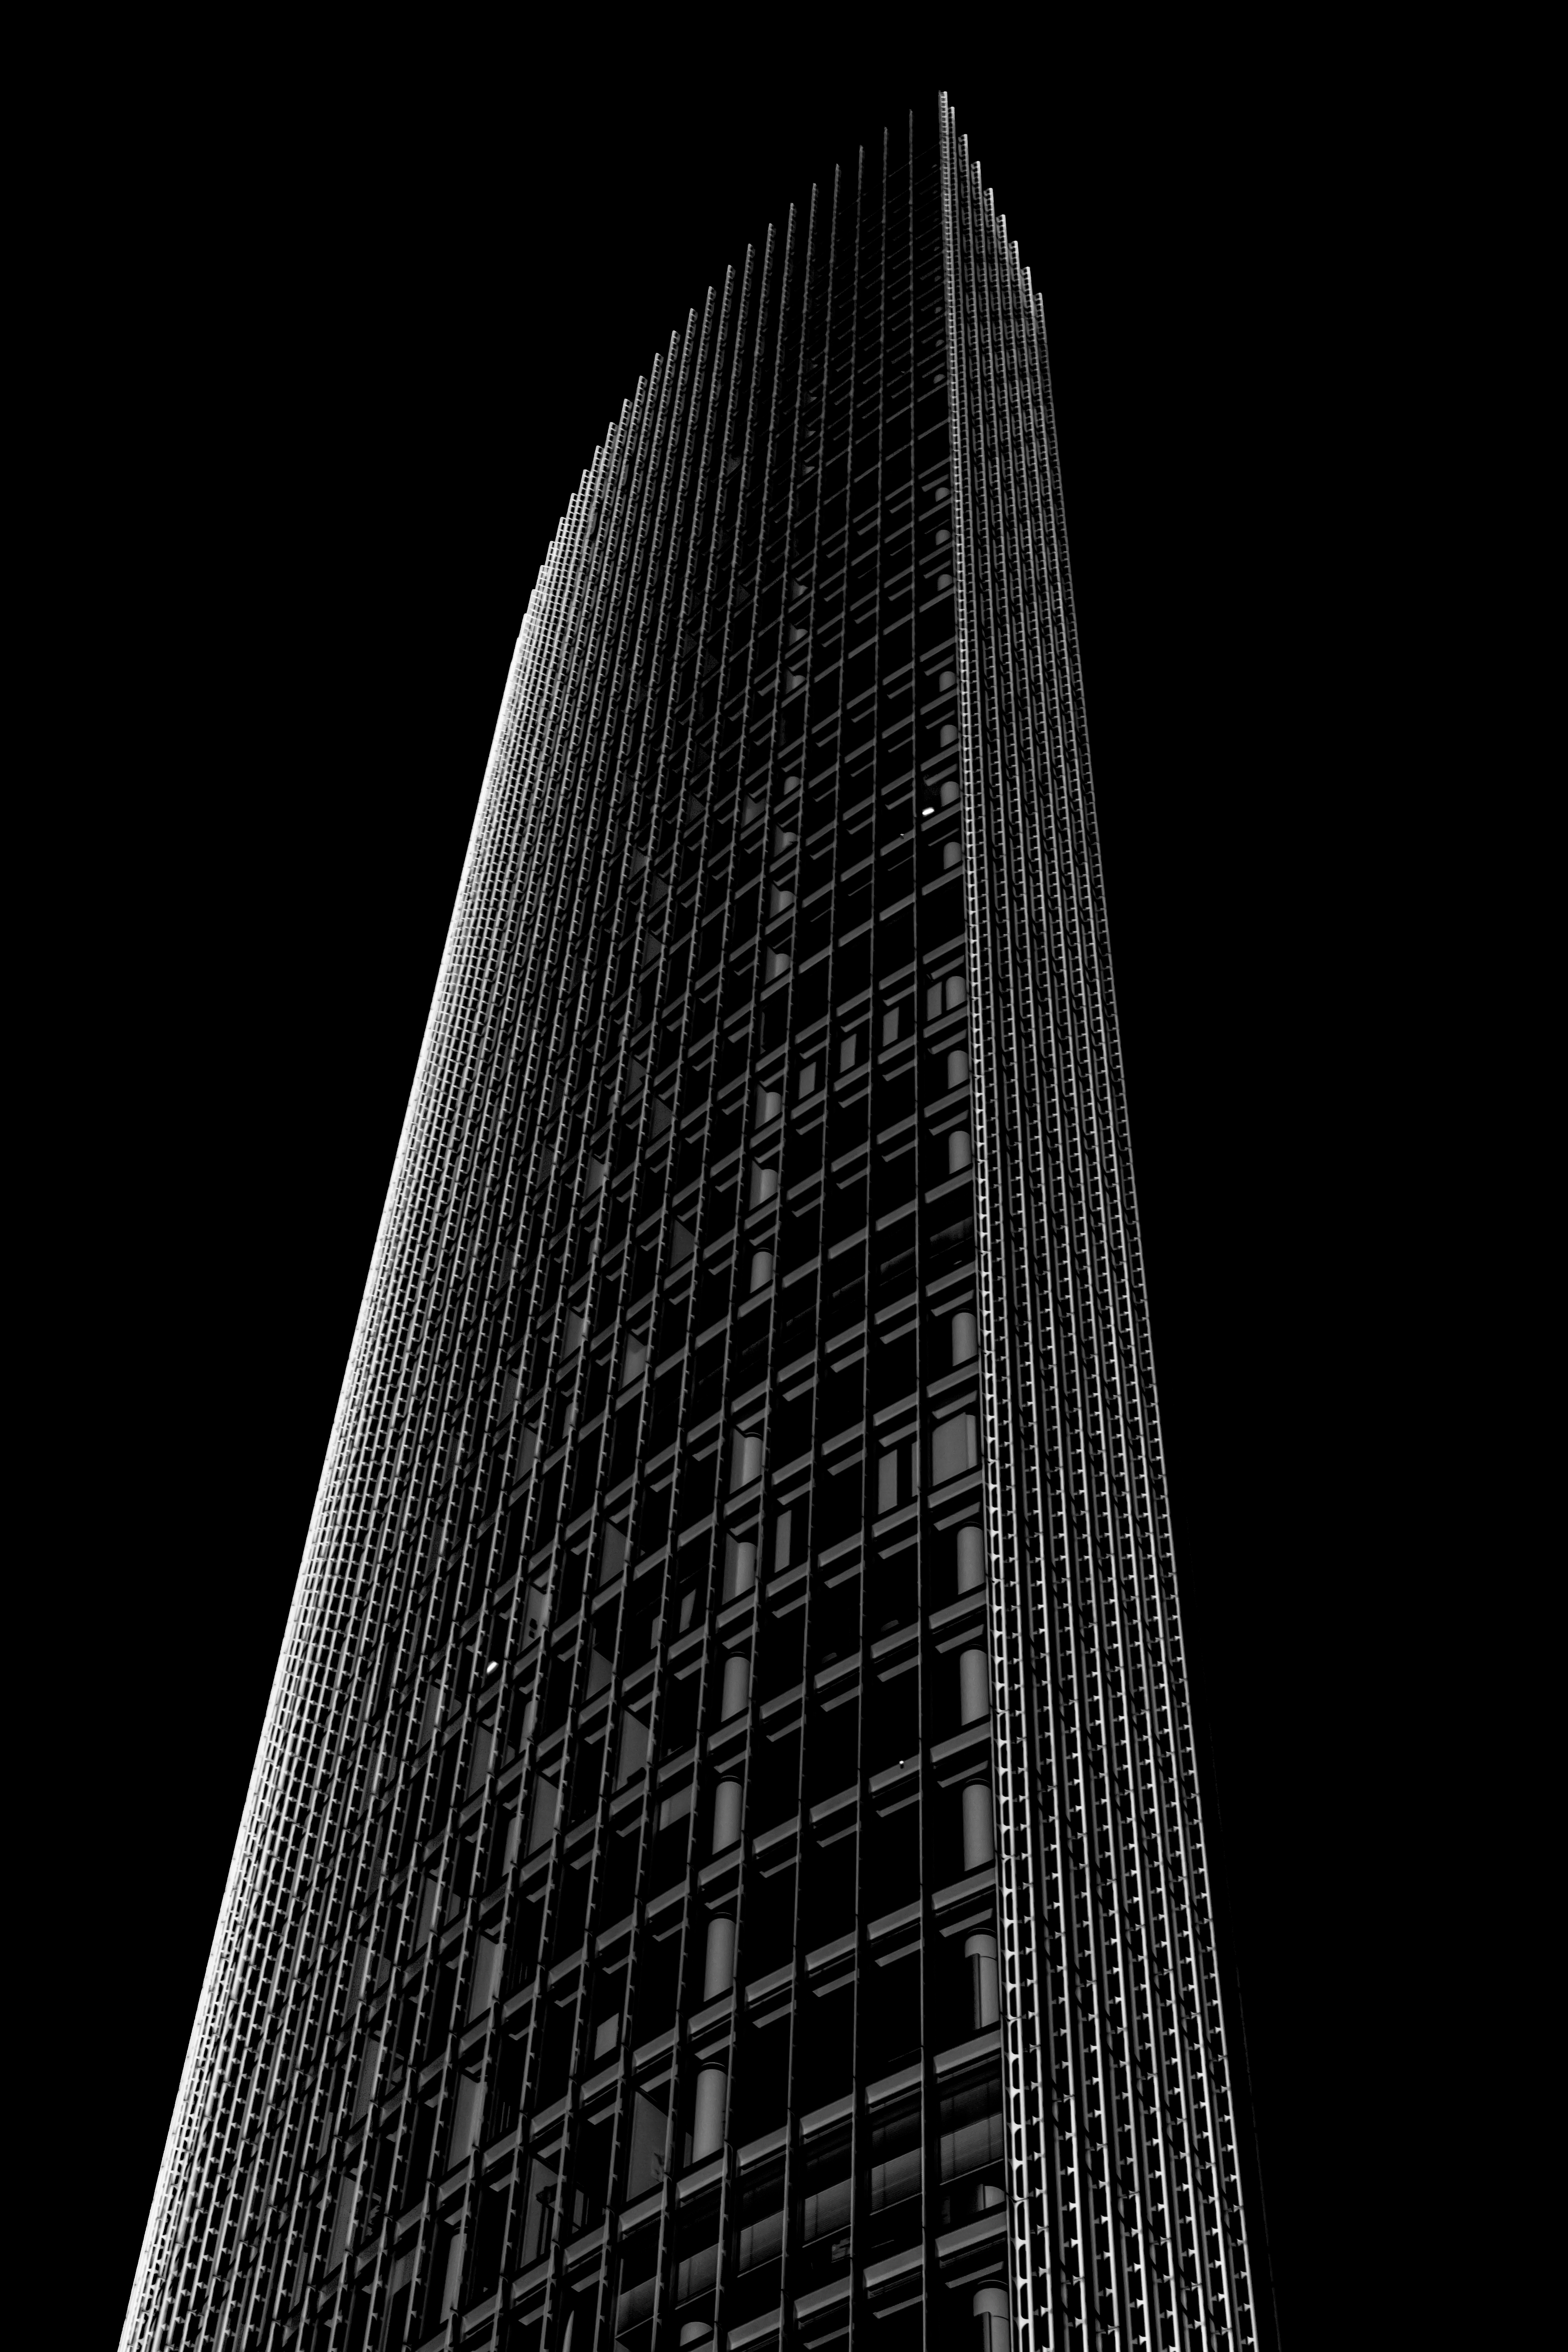 119694 Screensavers and Wallpapers Black And White for phone. Download architecture, skyscraper, building, minimalism, facade, black and white pictures for free